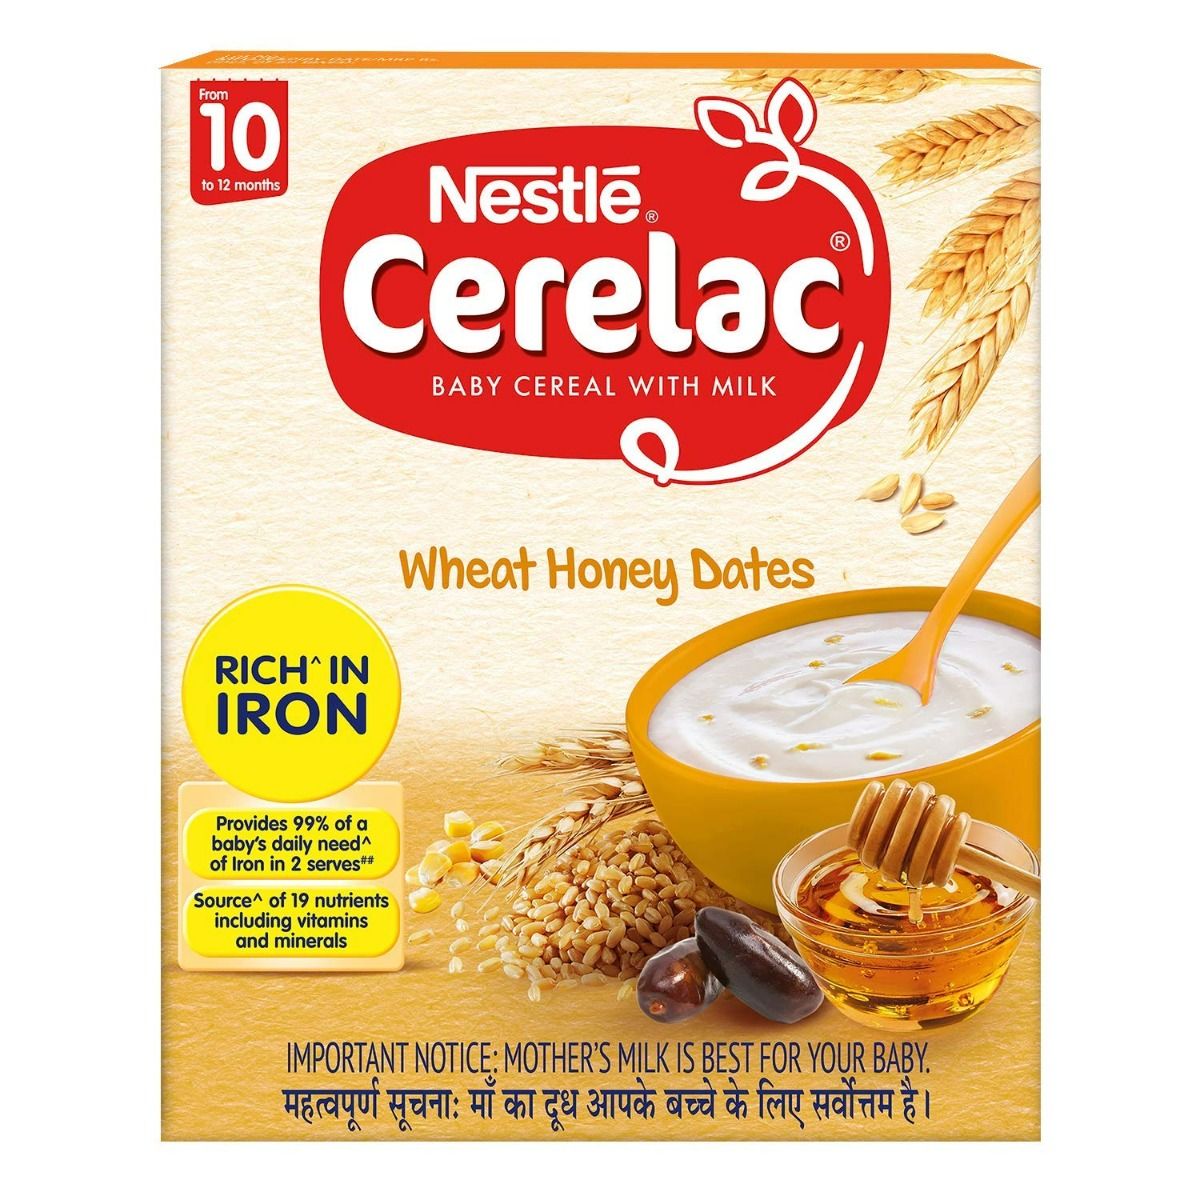 Buy Nestle Cerelac Wheat Honey Dates Baby Cereal, 10 to 12 Months, 300 gm Refill Pack Online